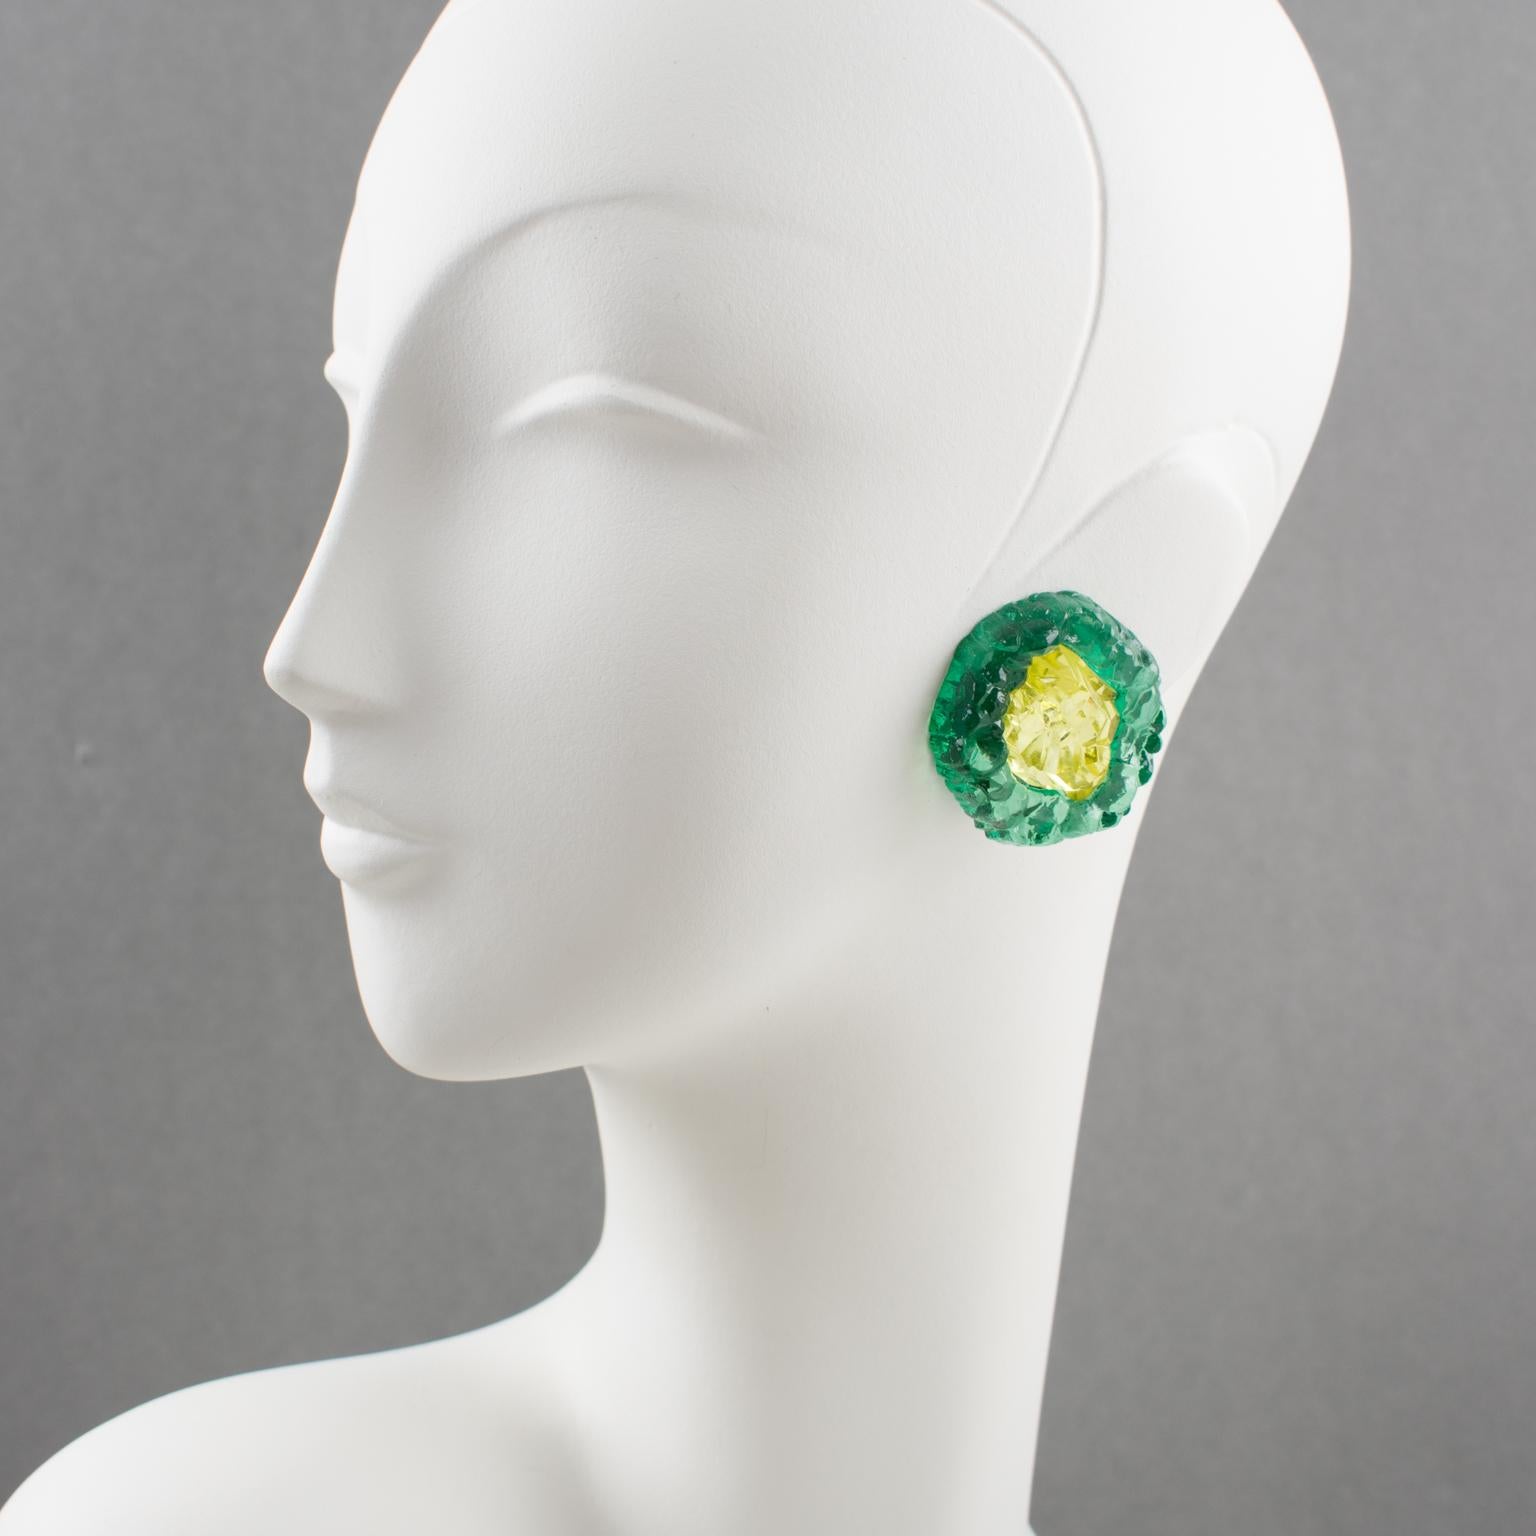 Impressive oversized carved Lucite clip-on earrings from Italian designer studio. Dimensional rounded shape with rock carving in luminous transparent viridian green and lemon yellow colors. Very unusual shape. No visible maker's mark.
Measurements: